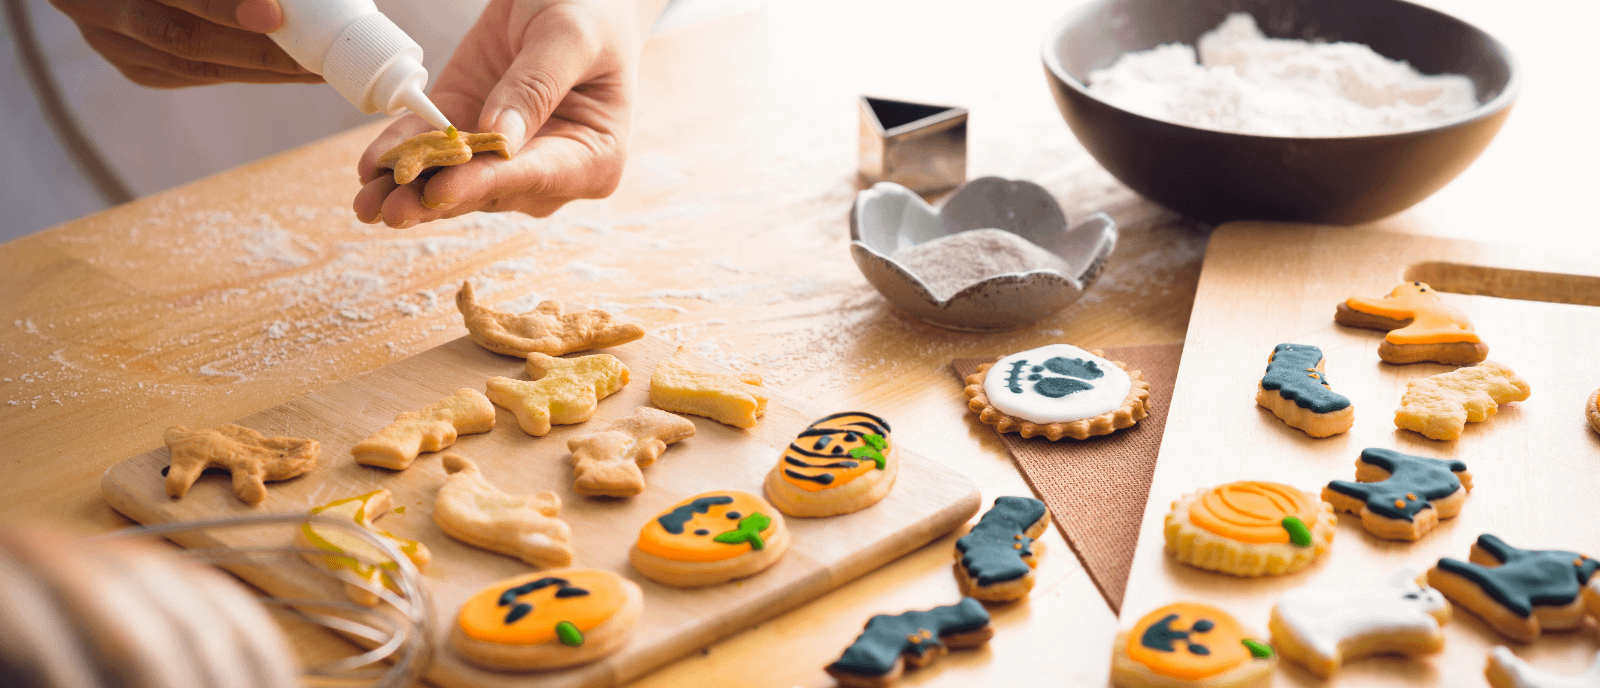 Person piping Halloween designs onto homemade biscuits.